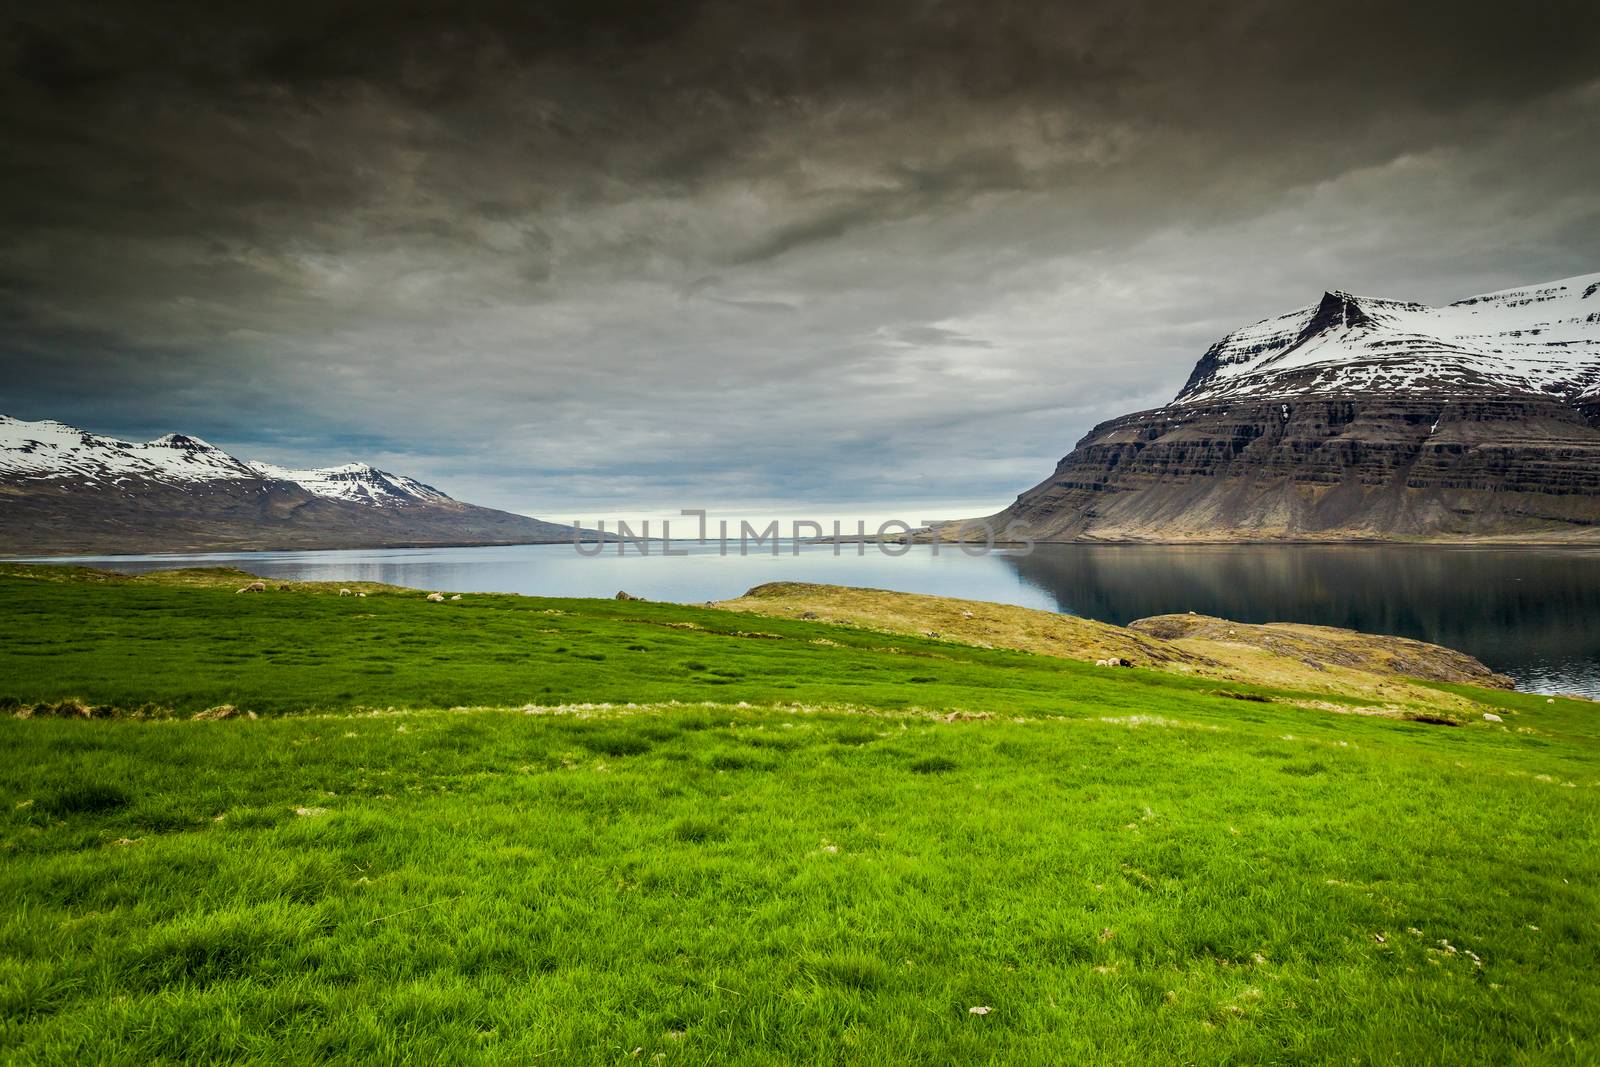 The Amazing Iceland by Iko